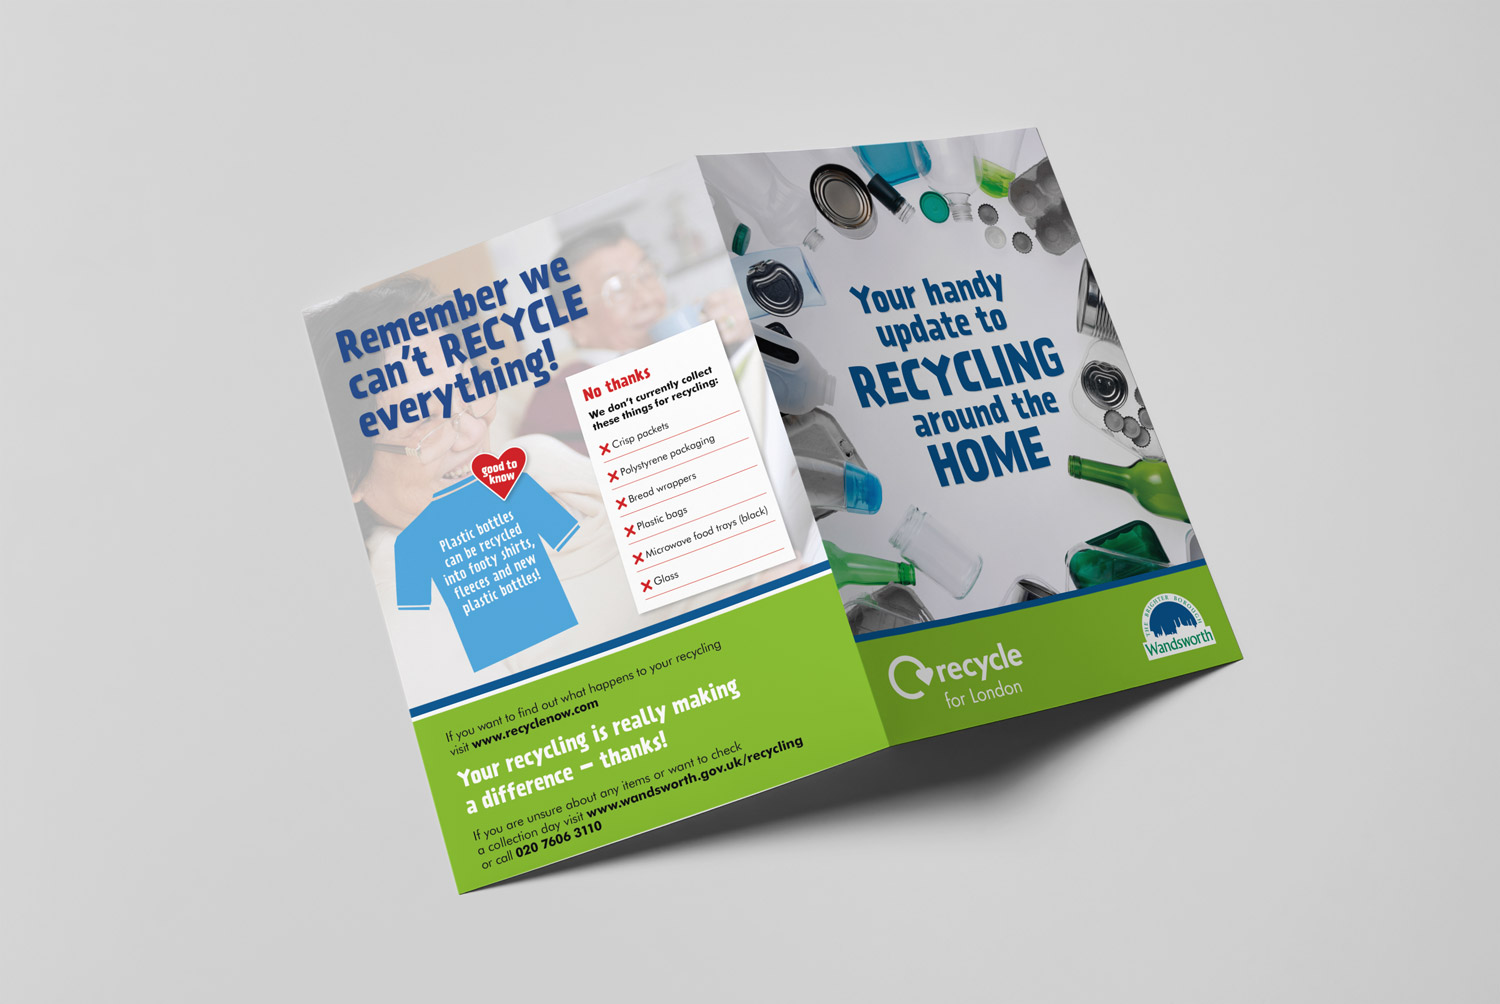 Recycle-for-London-Recycling-Leaflets-by-Get-it-Sorted.jpg